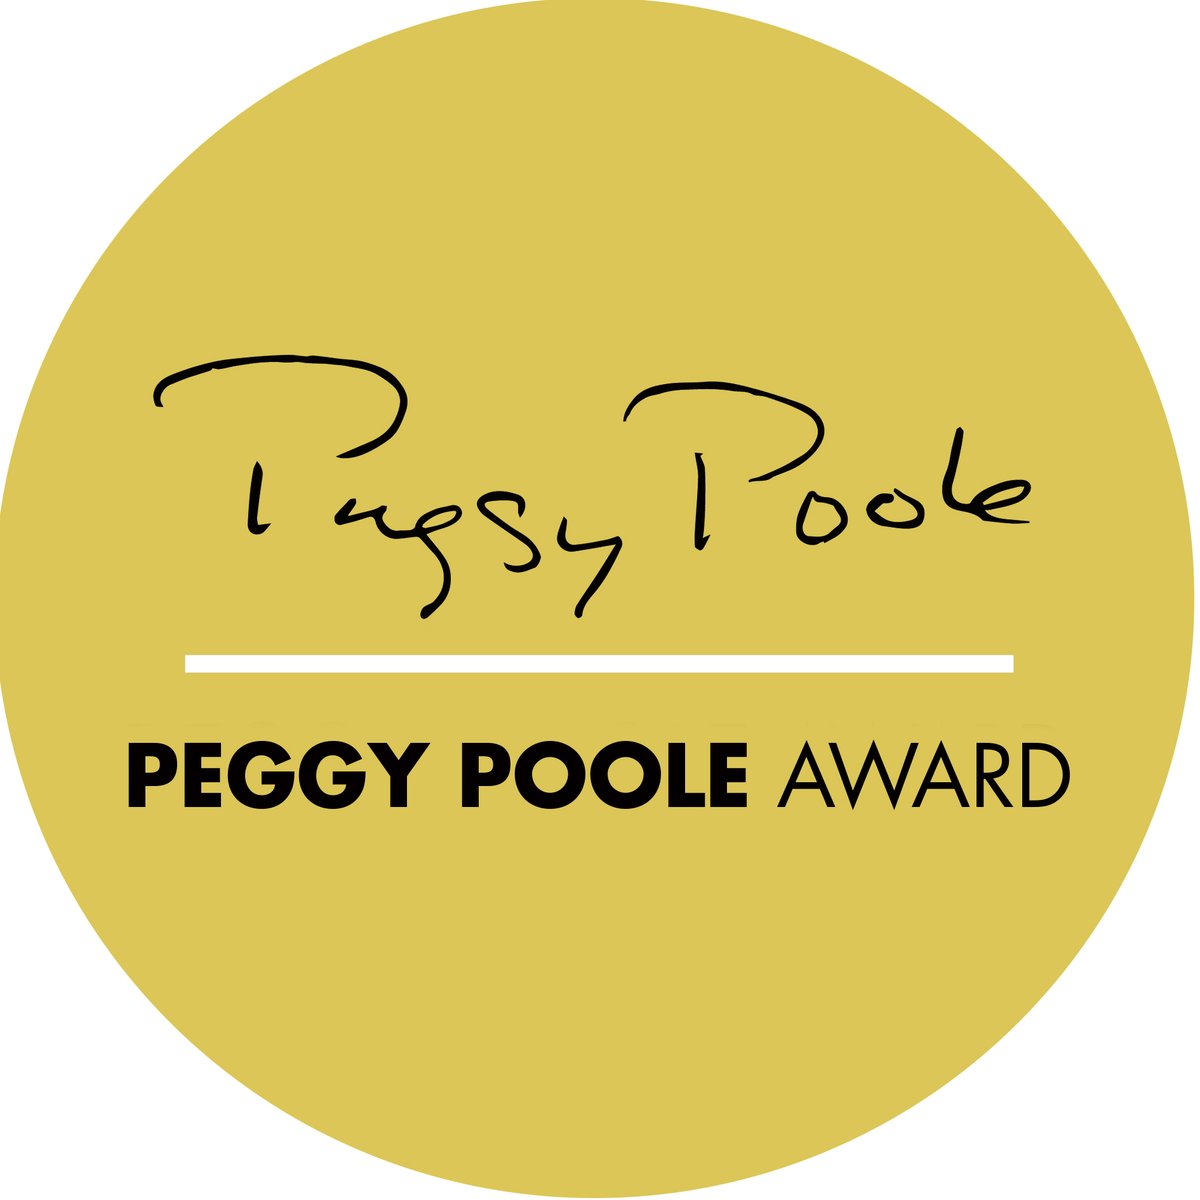 test Twitter Media - As part of the #NationalPoetryCompetition, Peggy Poole gives a poet in the North West of England a year of mentoring with a top poet. 
Previous winner @YvonneReddick said 'My mentor, Deryn Rees-Jones, gave me the courage to enter poetic territory I’d been too scared to approach.' https://t.co/qARarmfRs6